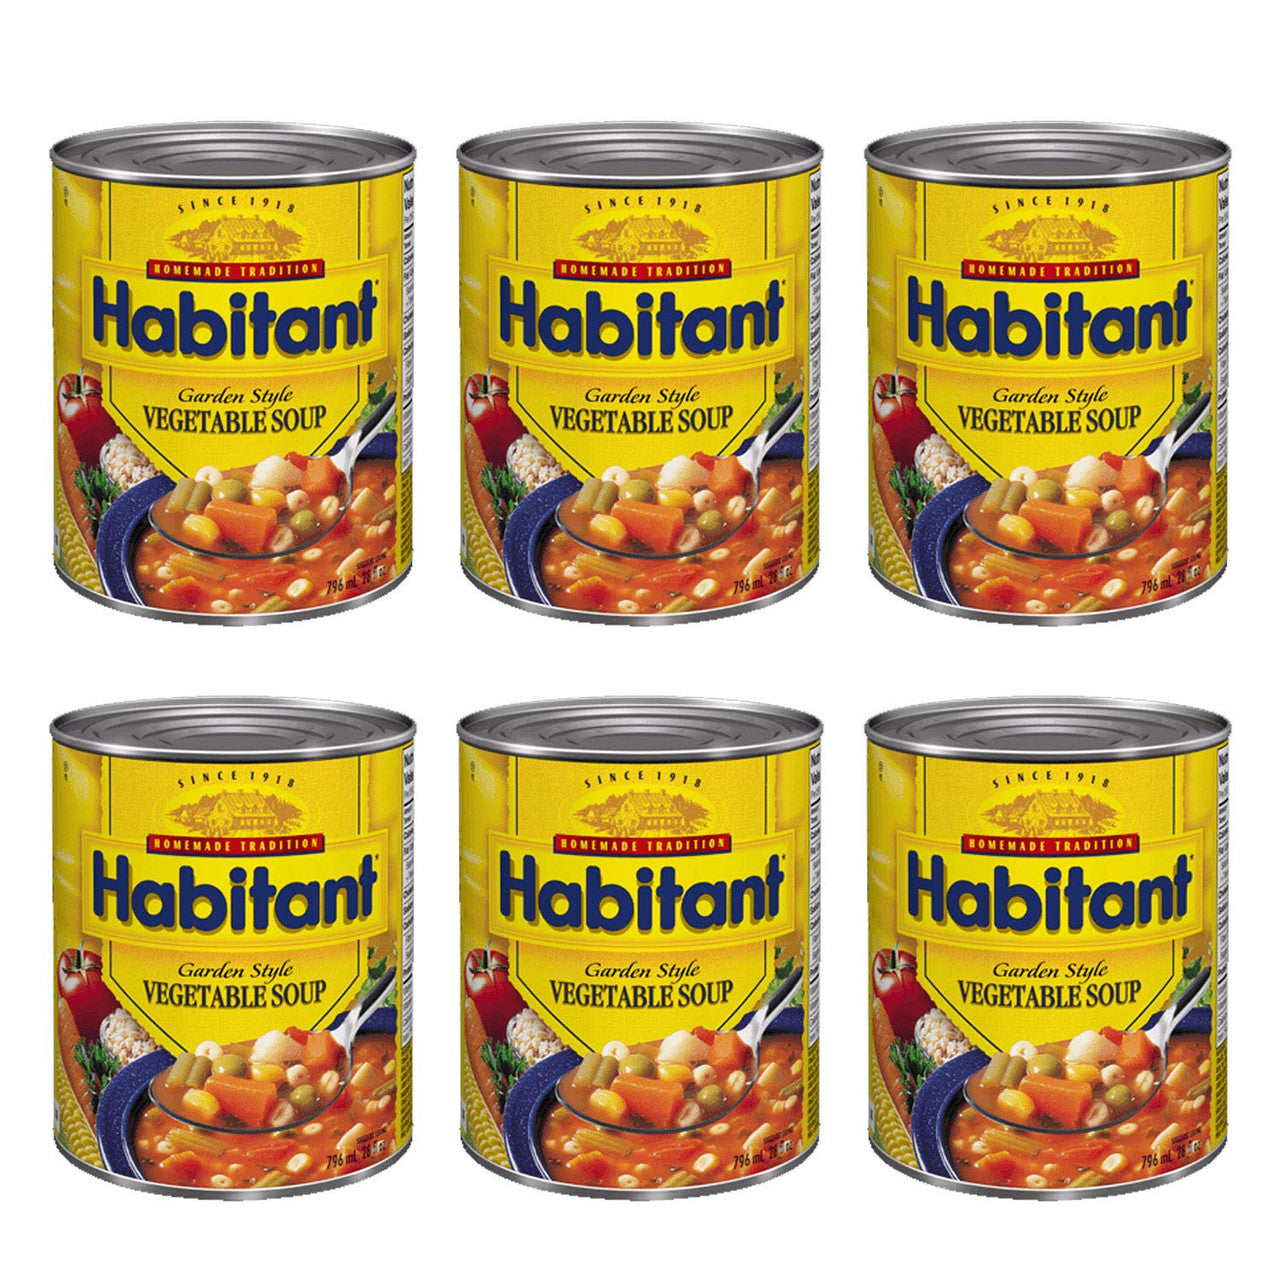 Habitant Garden Style Vegetable Soup 796ml/28 fl. oz. 6-Pack {Imported from Canada}